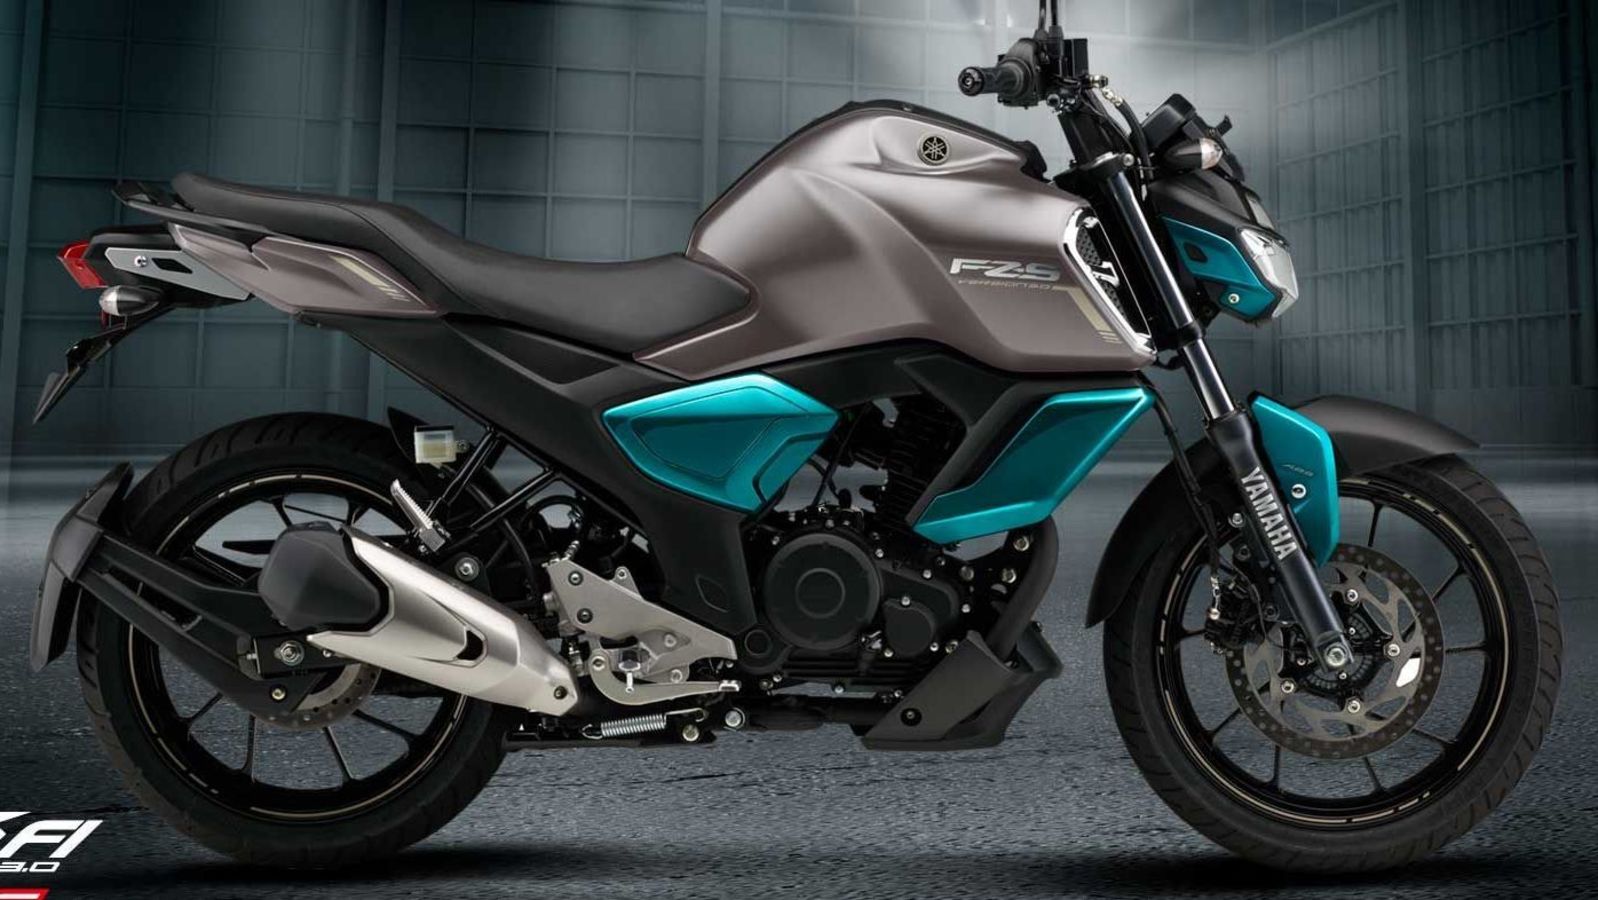 New 2020 Yamaha FZS V3 BS6 Vintage Edition Launched in India  Know its  Price and Details